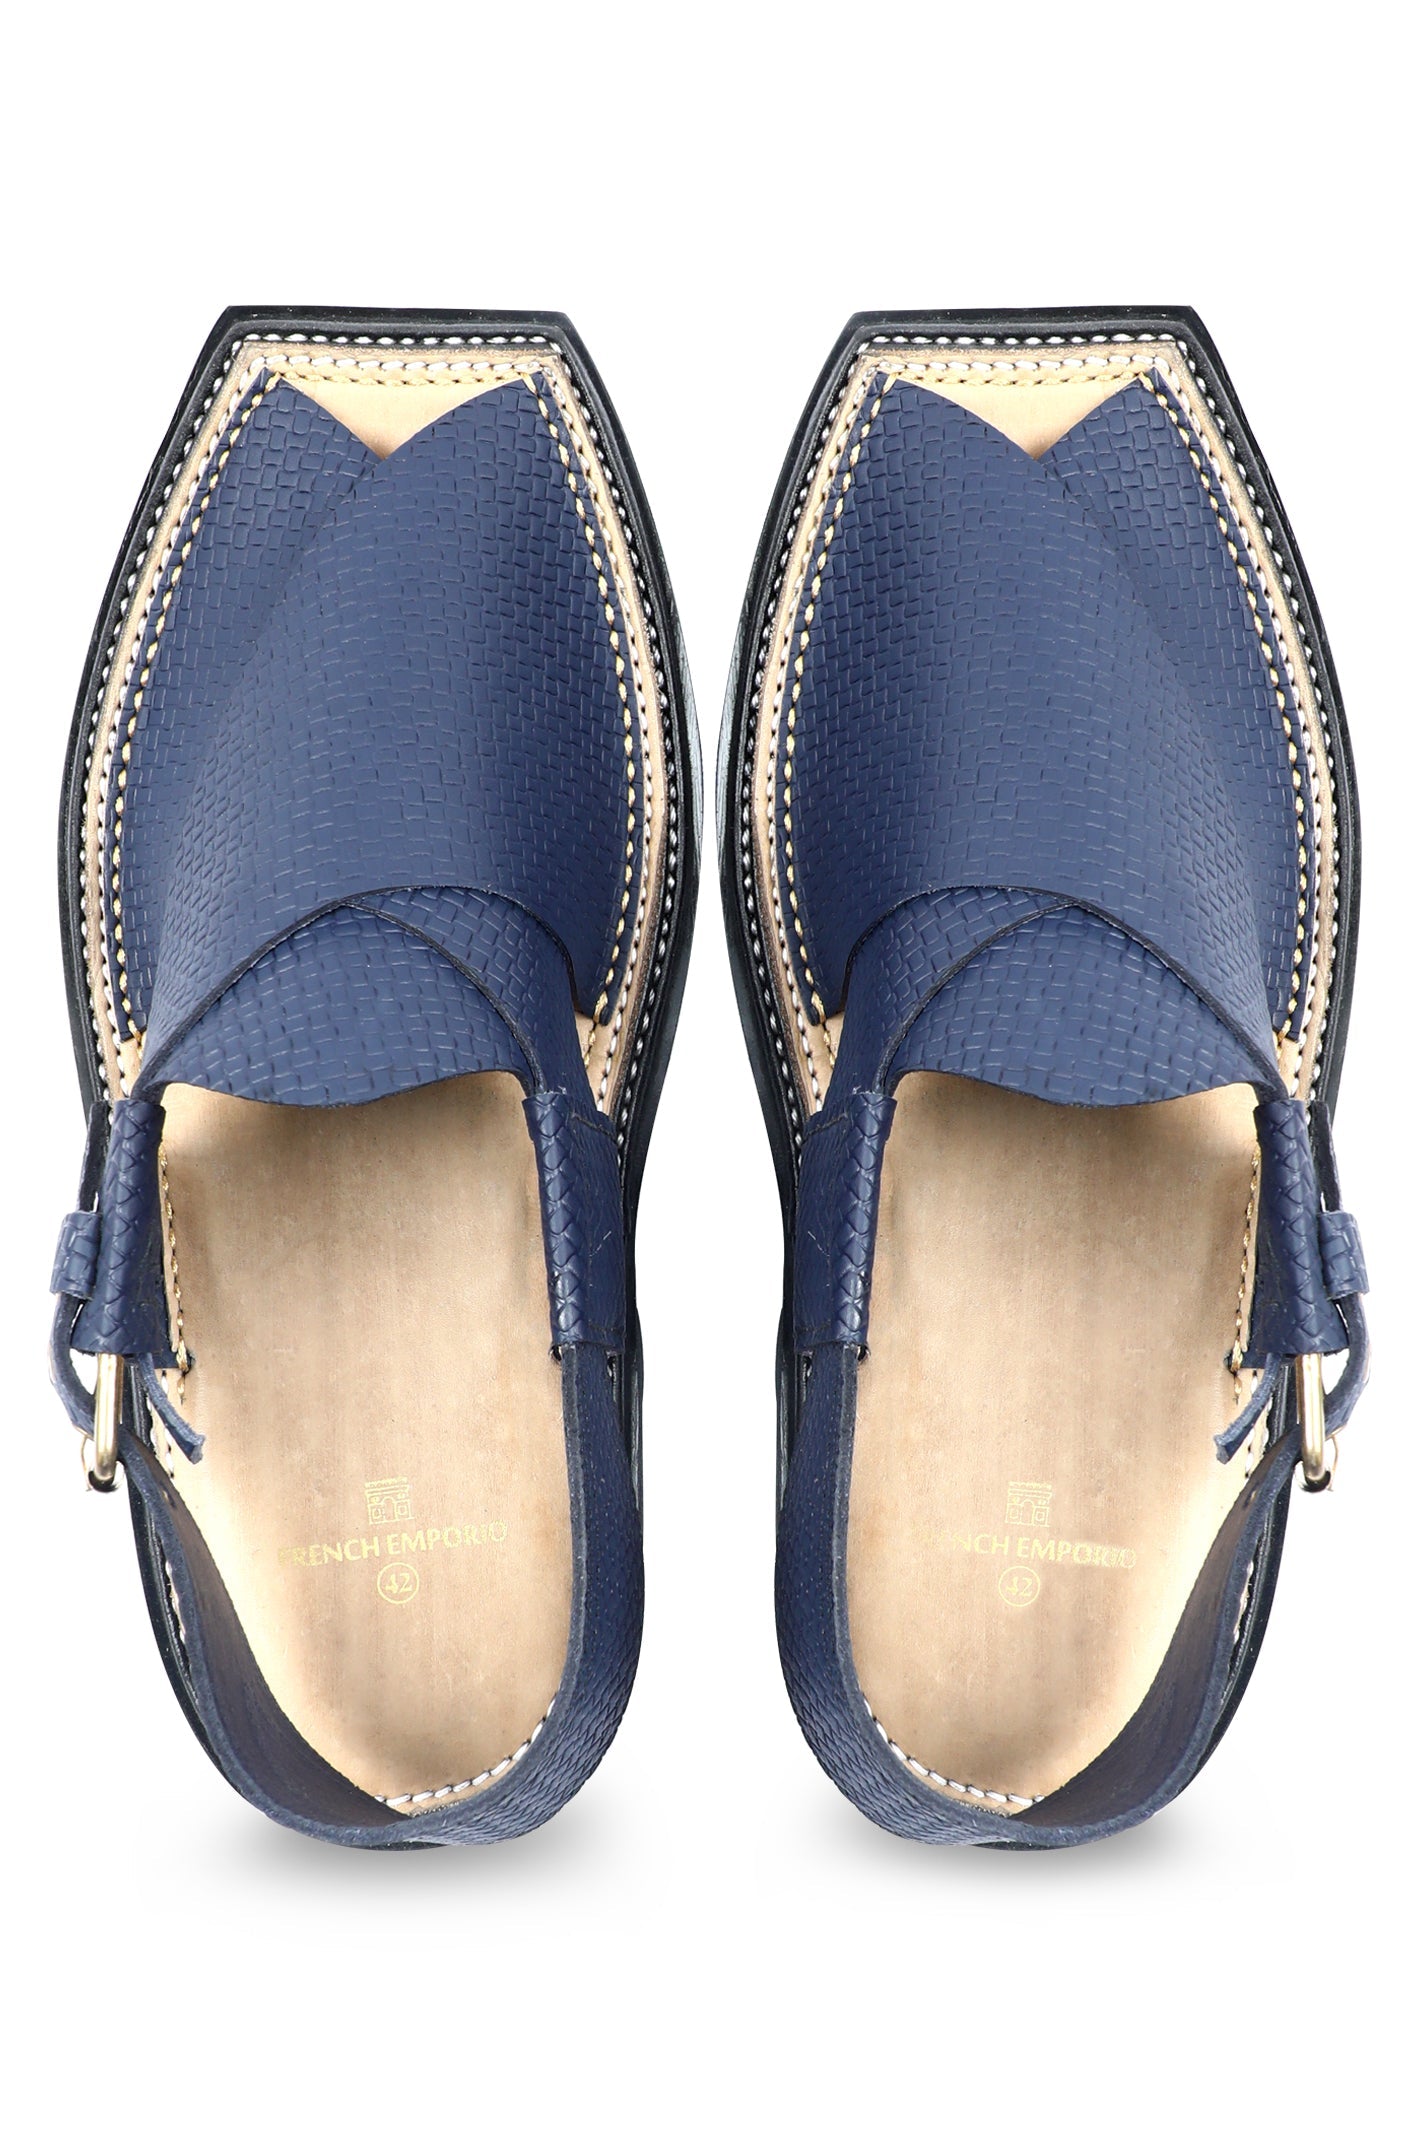 French Emporio Men Sandals SKU: PSLD-0032-BLUE - Diners